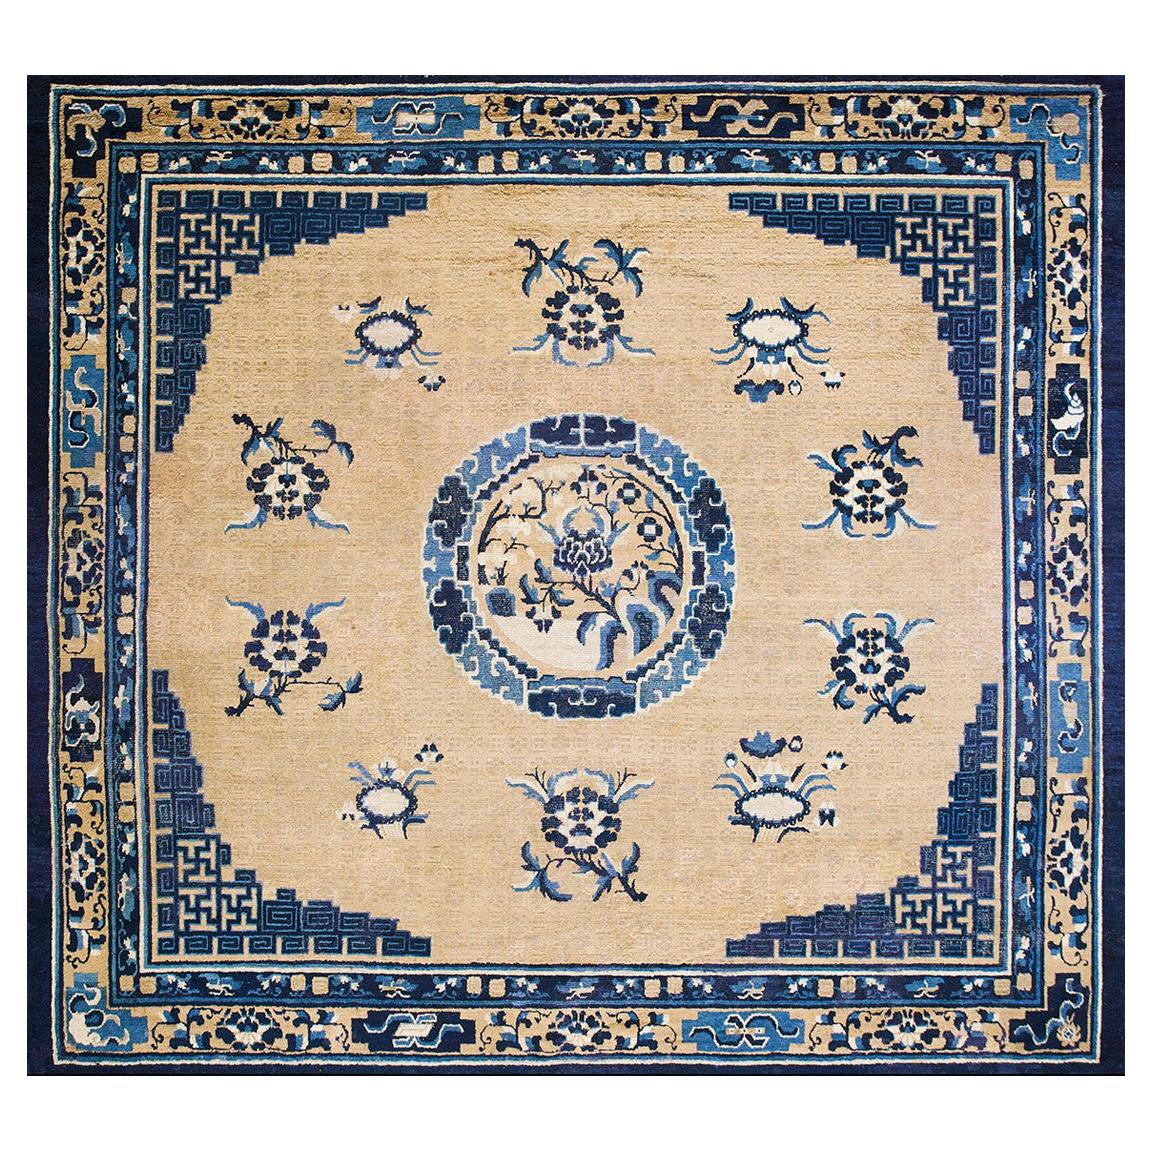 Antique Ningxia Chinese Square Carpet For Sale